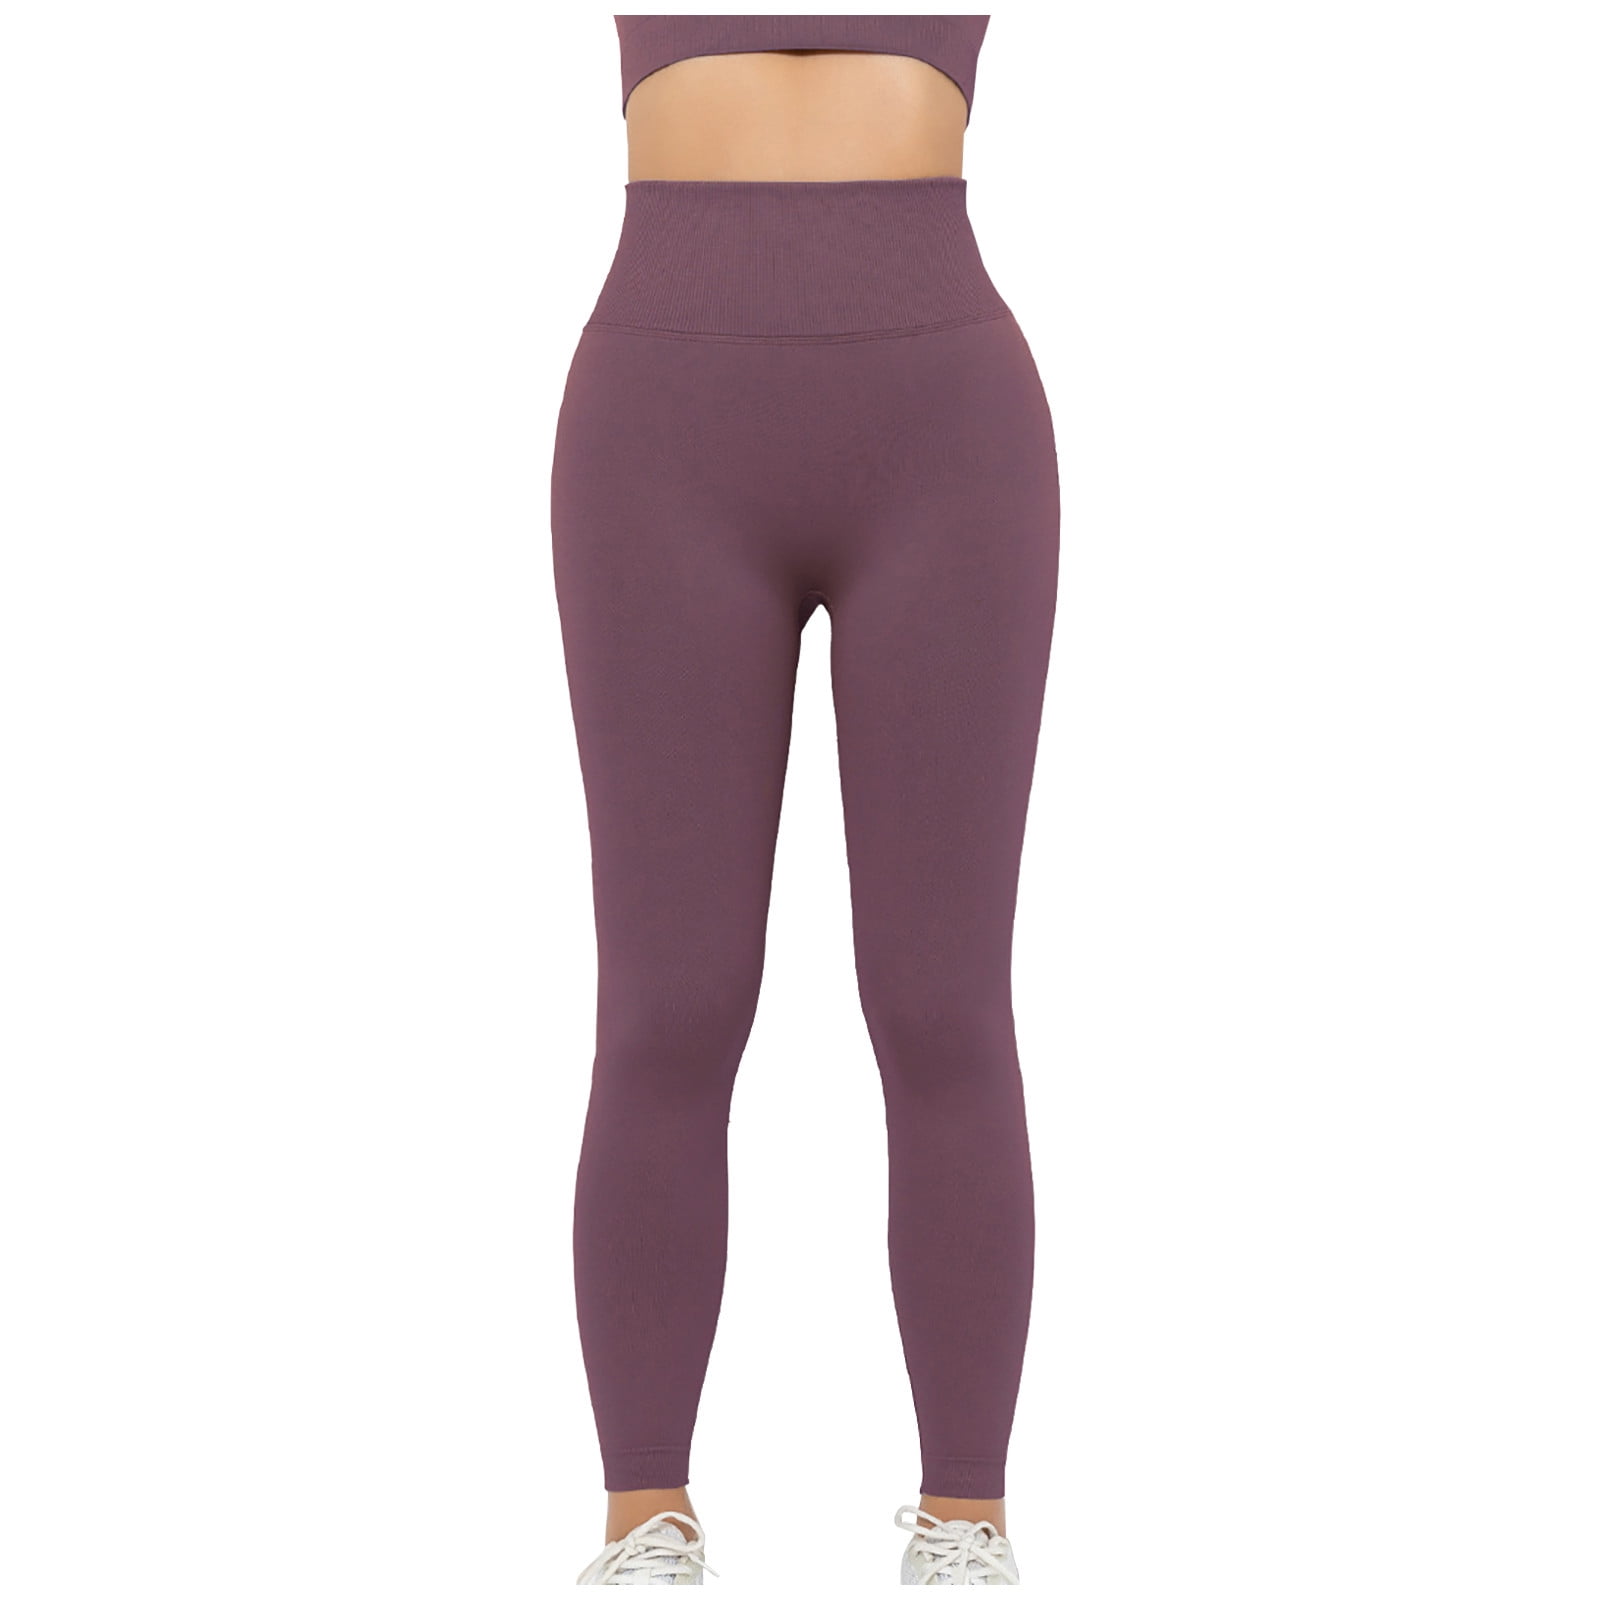 Womens Soft Yoga Leggings With Front Seam Buttery Soft Workout Active Pants  7/8 Length From Smart_boxes, $11.85